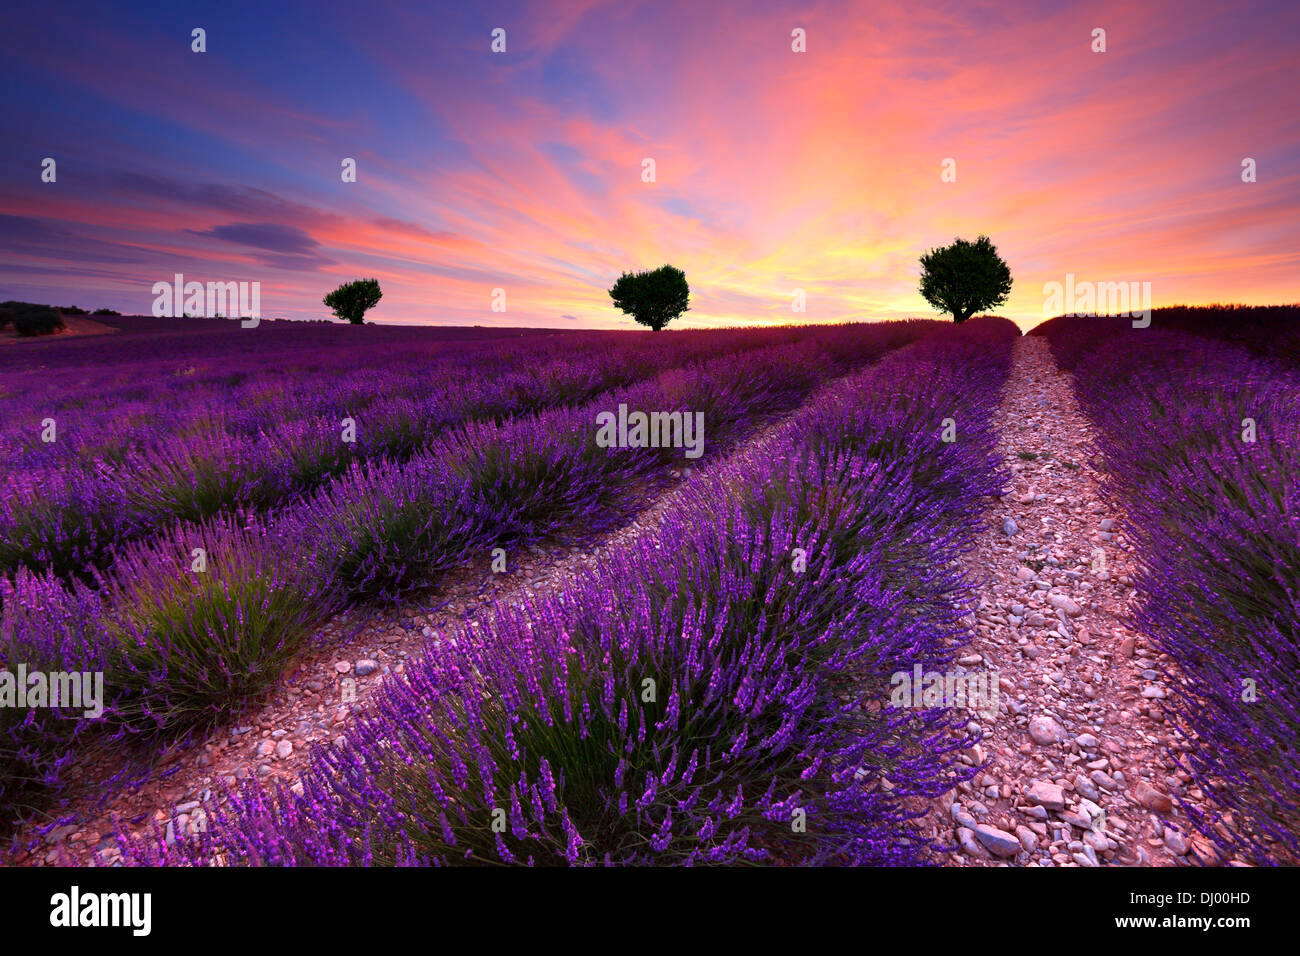 Three on the hill in lavender field at sunset. France Provence. Stock Photo